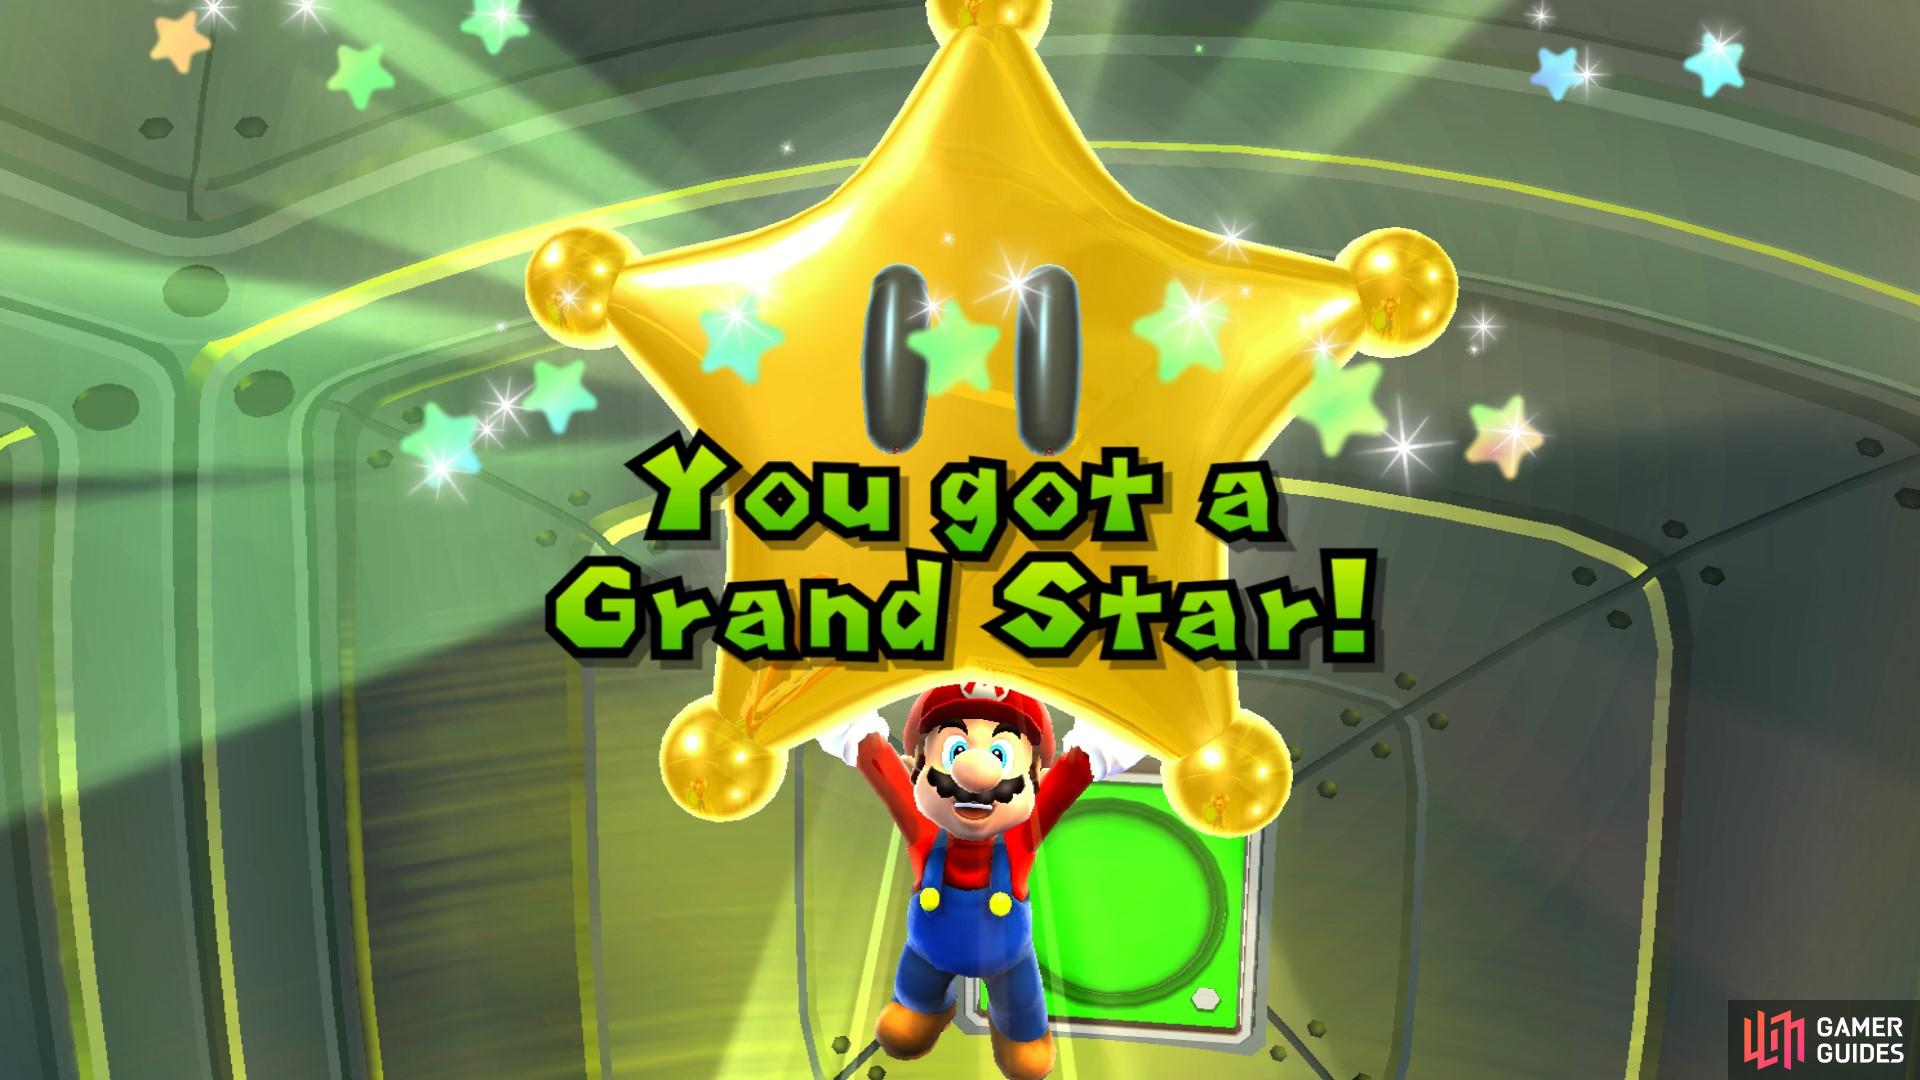 Congratulations on your first Grand Star!